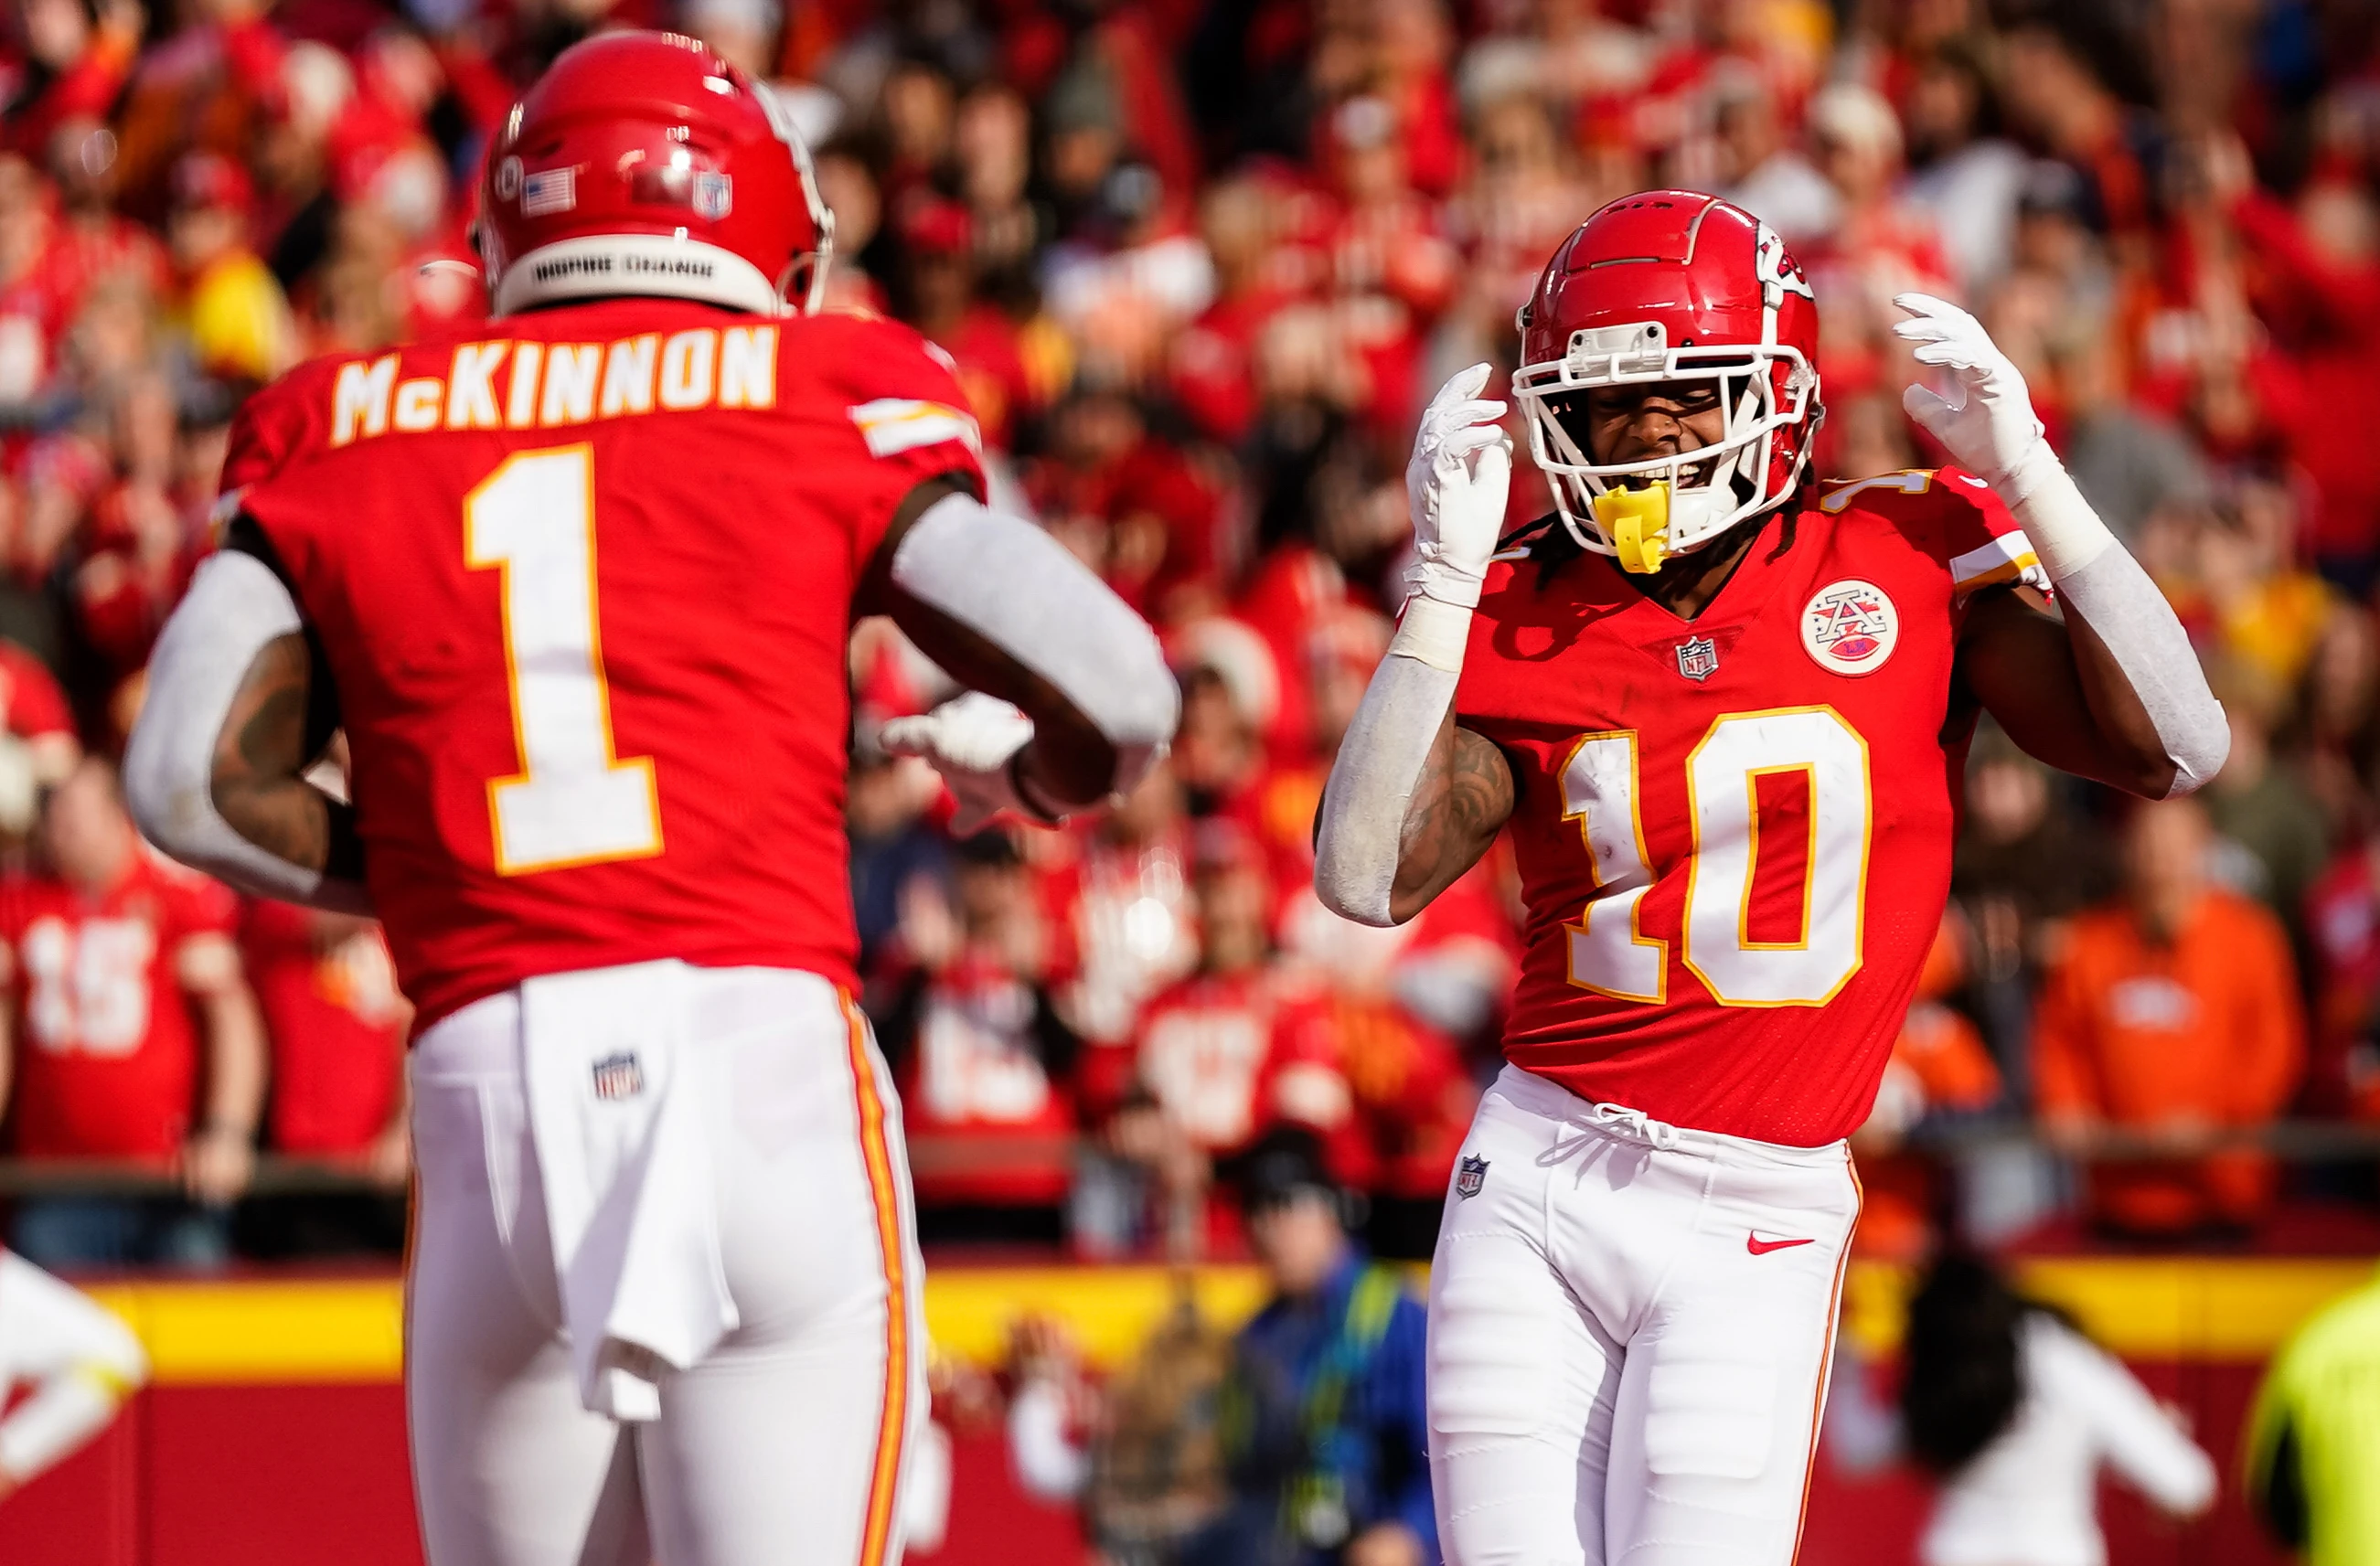 Kansas City Chiefs running back Isiah Pacheco (10) celebrates with running back Jerick McKinnon (1) after scoring a touchdown during the first half against the Denver Broncos at GEHA Field at Arrowhead Stadium.